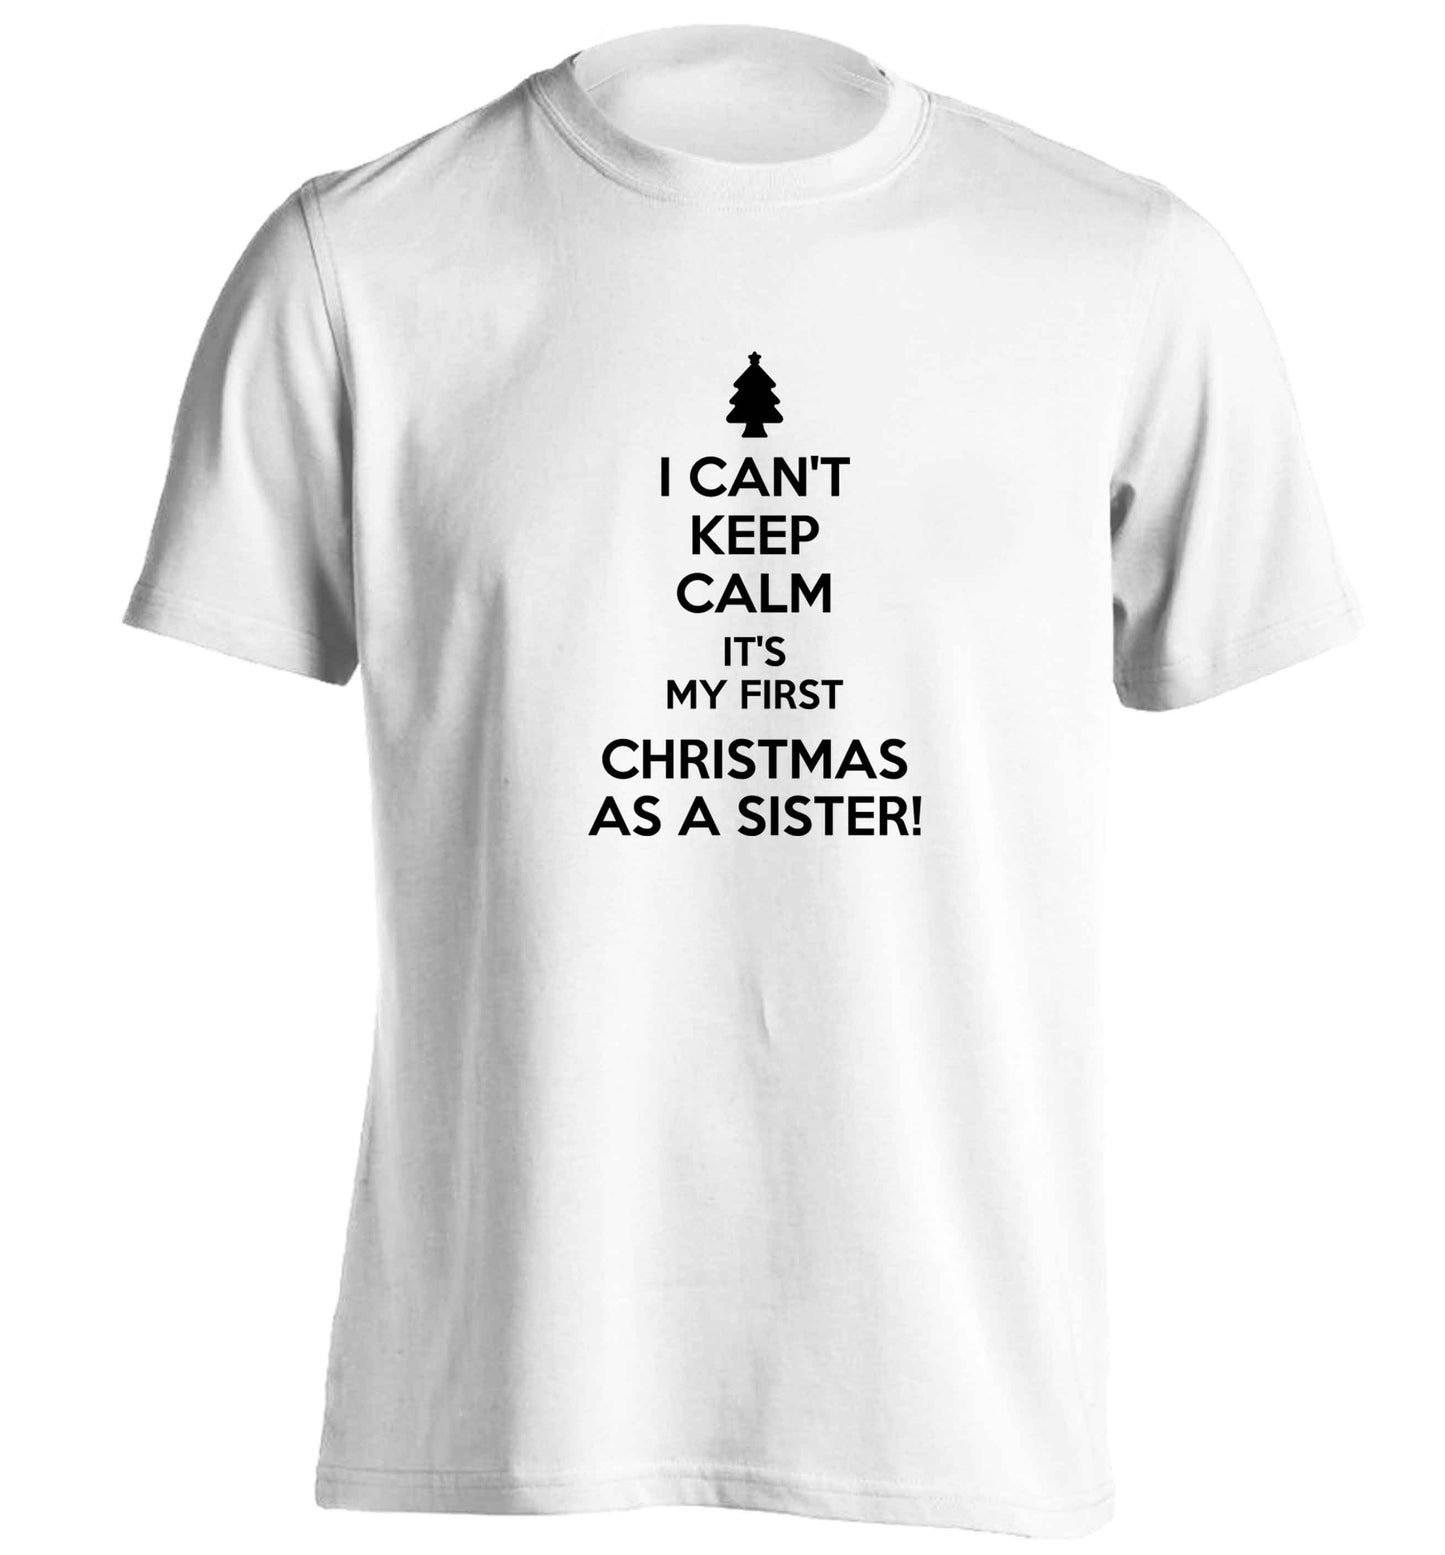 I can't keep calm it's my first Christmas as a sister! adults unisex white Tshirt 2XL